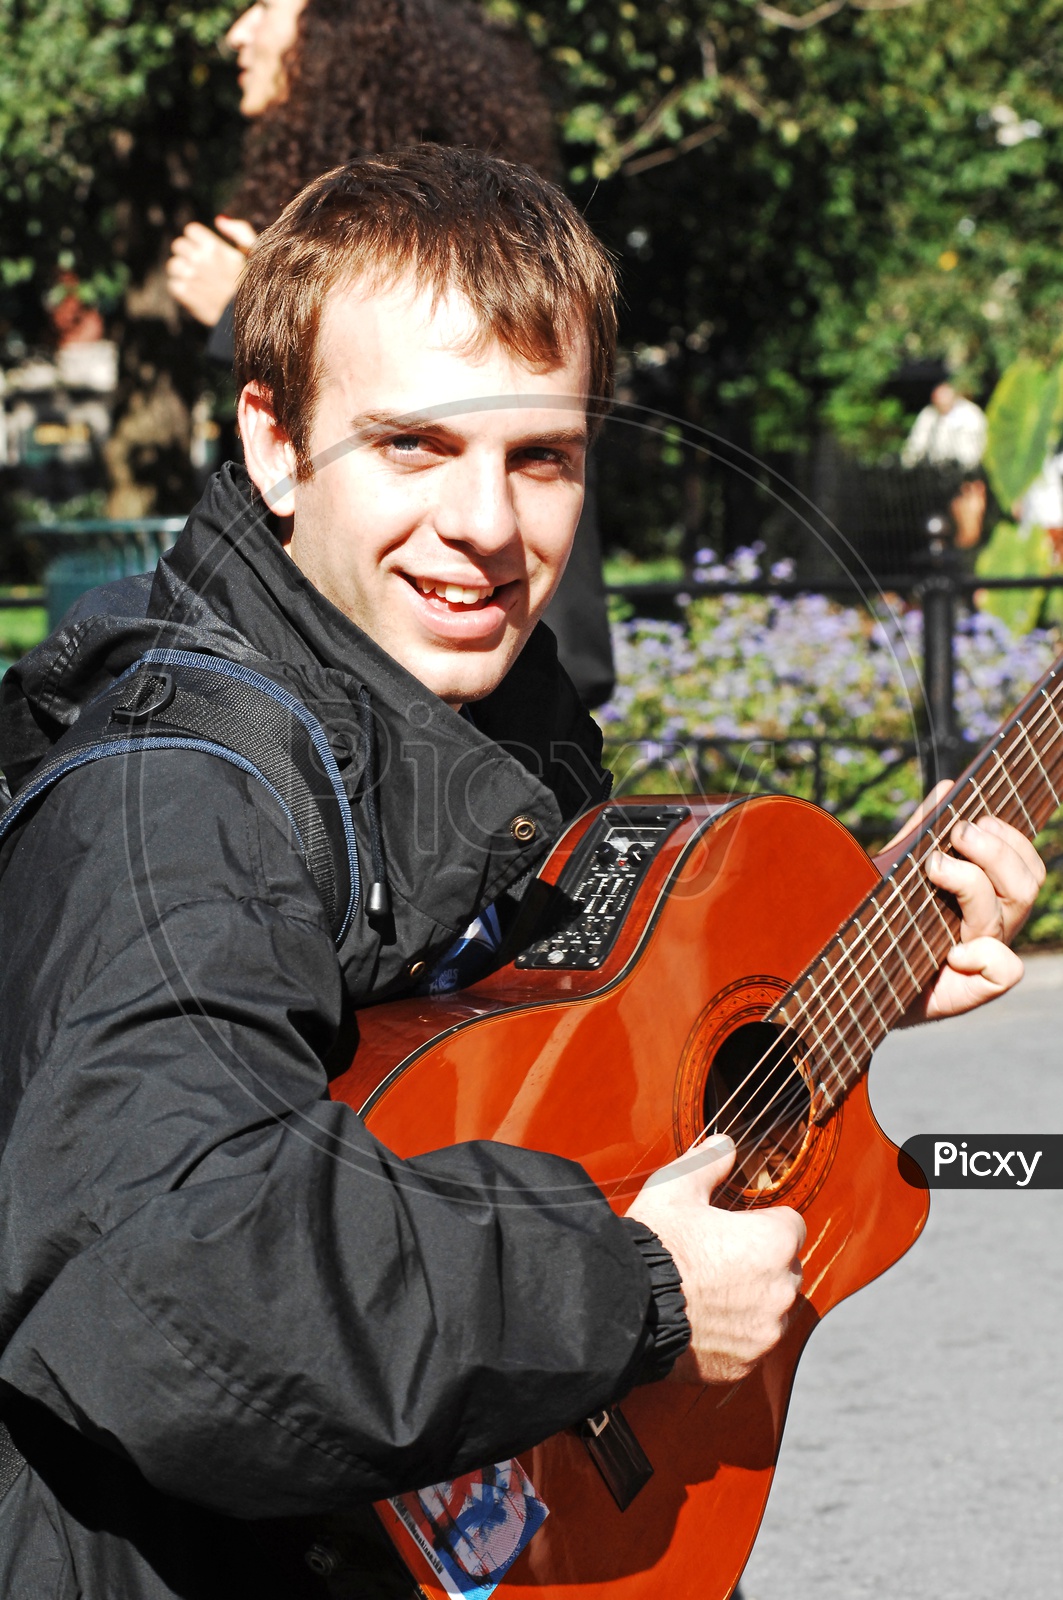 A foreigner playing guitar